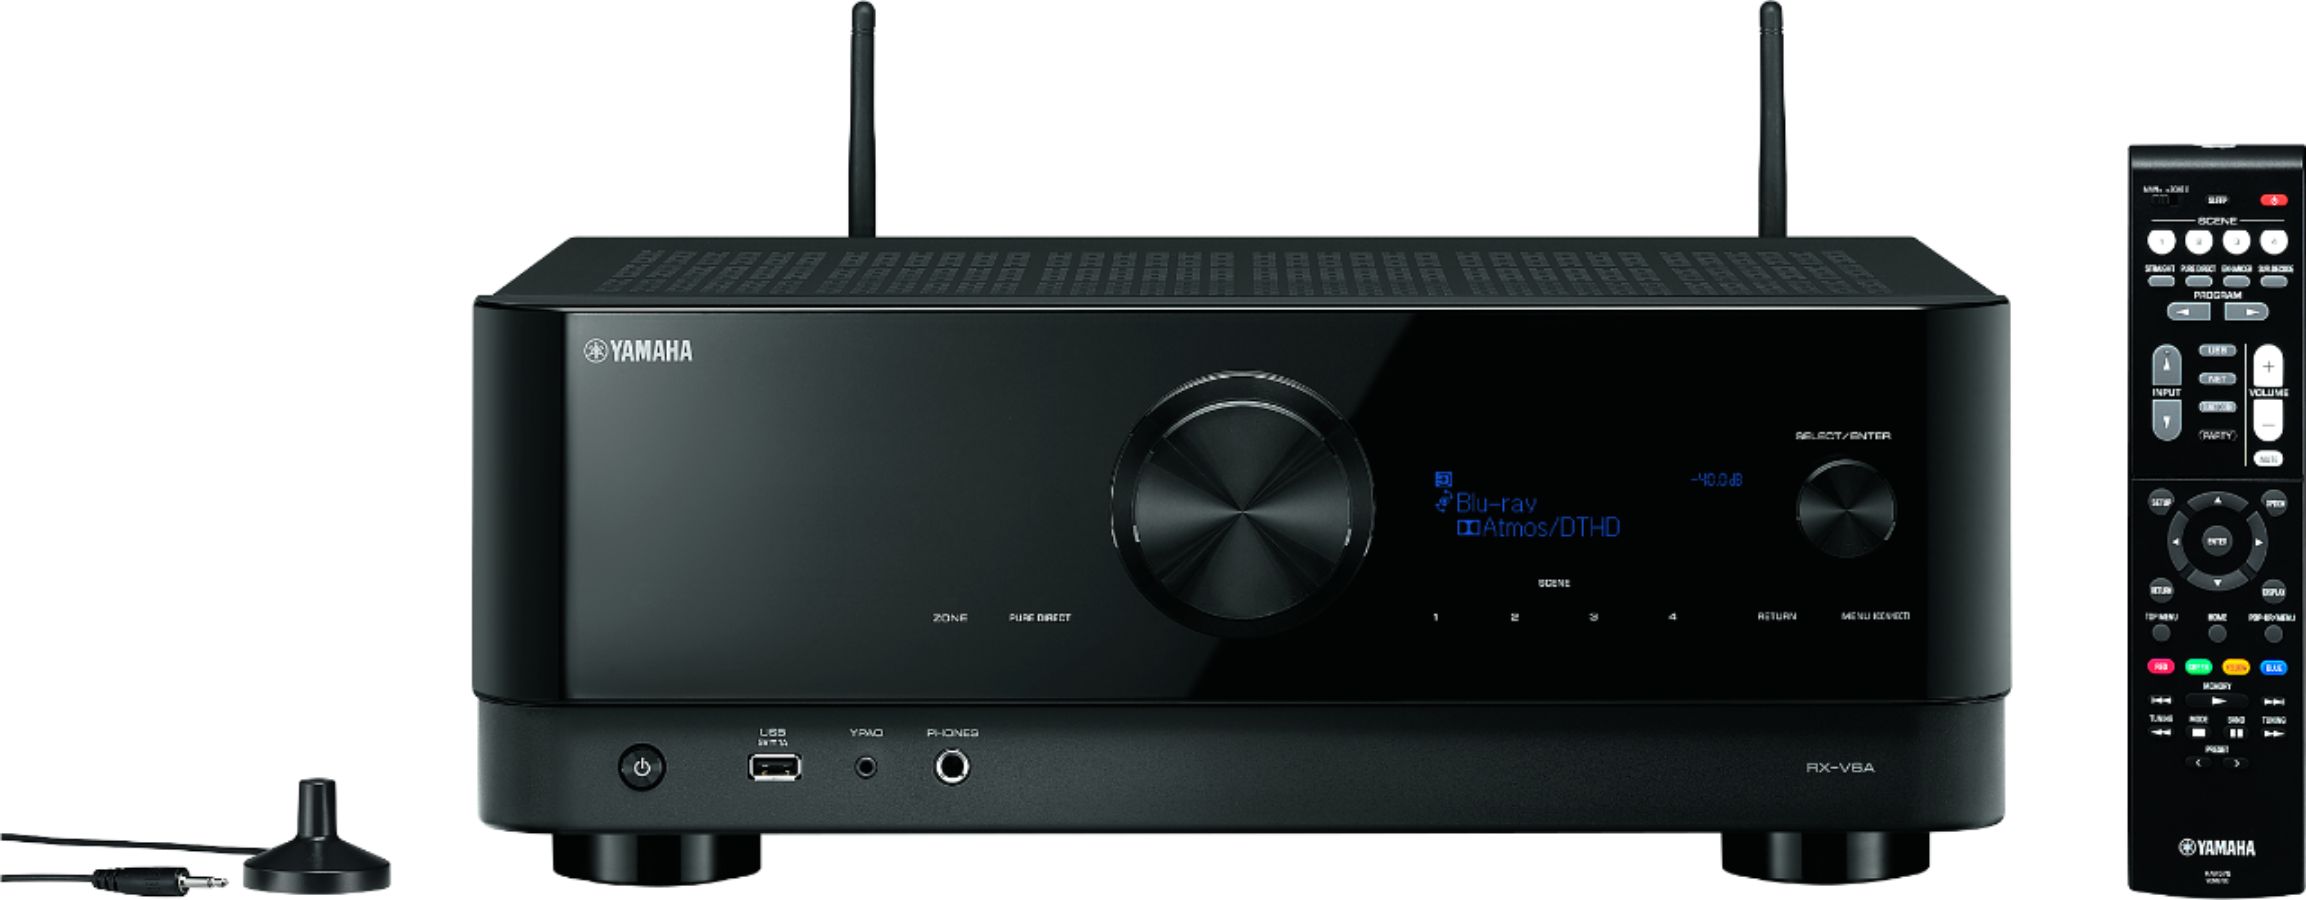 Yamaha RX-V6A 7.2-channel AV with 8K HDMI and MusicCast Black RX-V6ABL - Best Buy